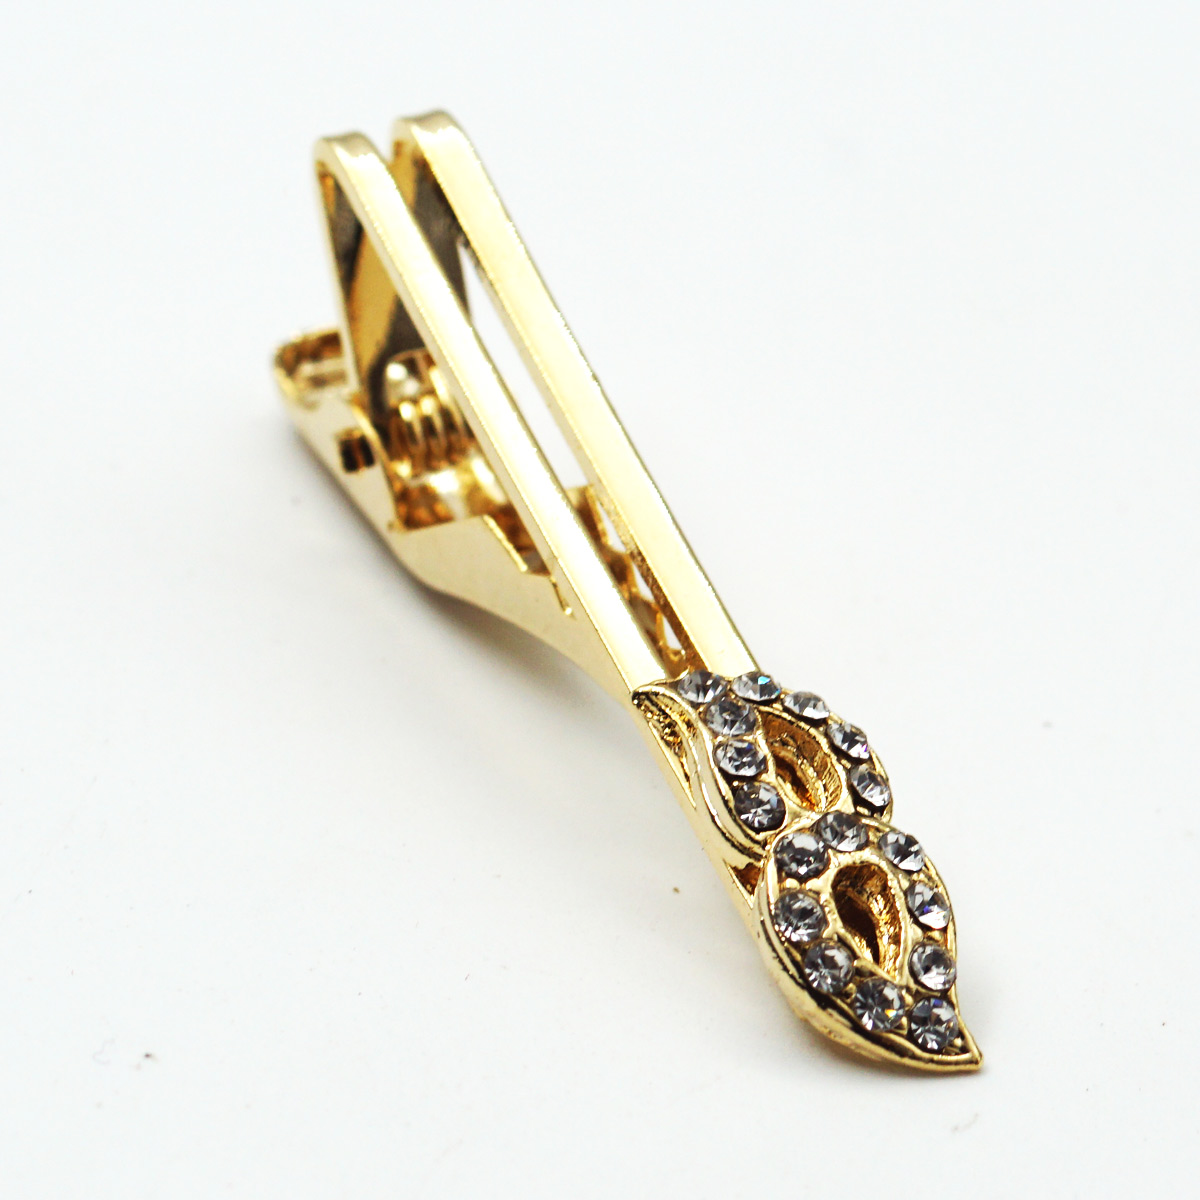 penhouse.in Gold Color With Leaf Design Stone Tie Pin SKU 87308